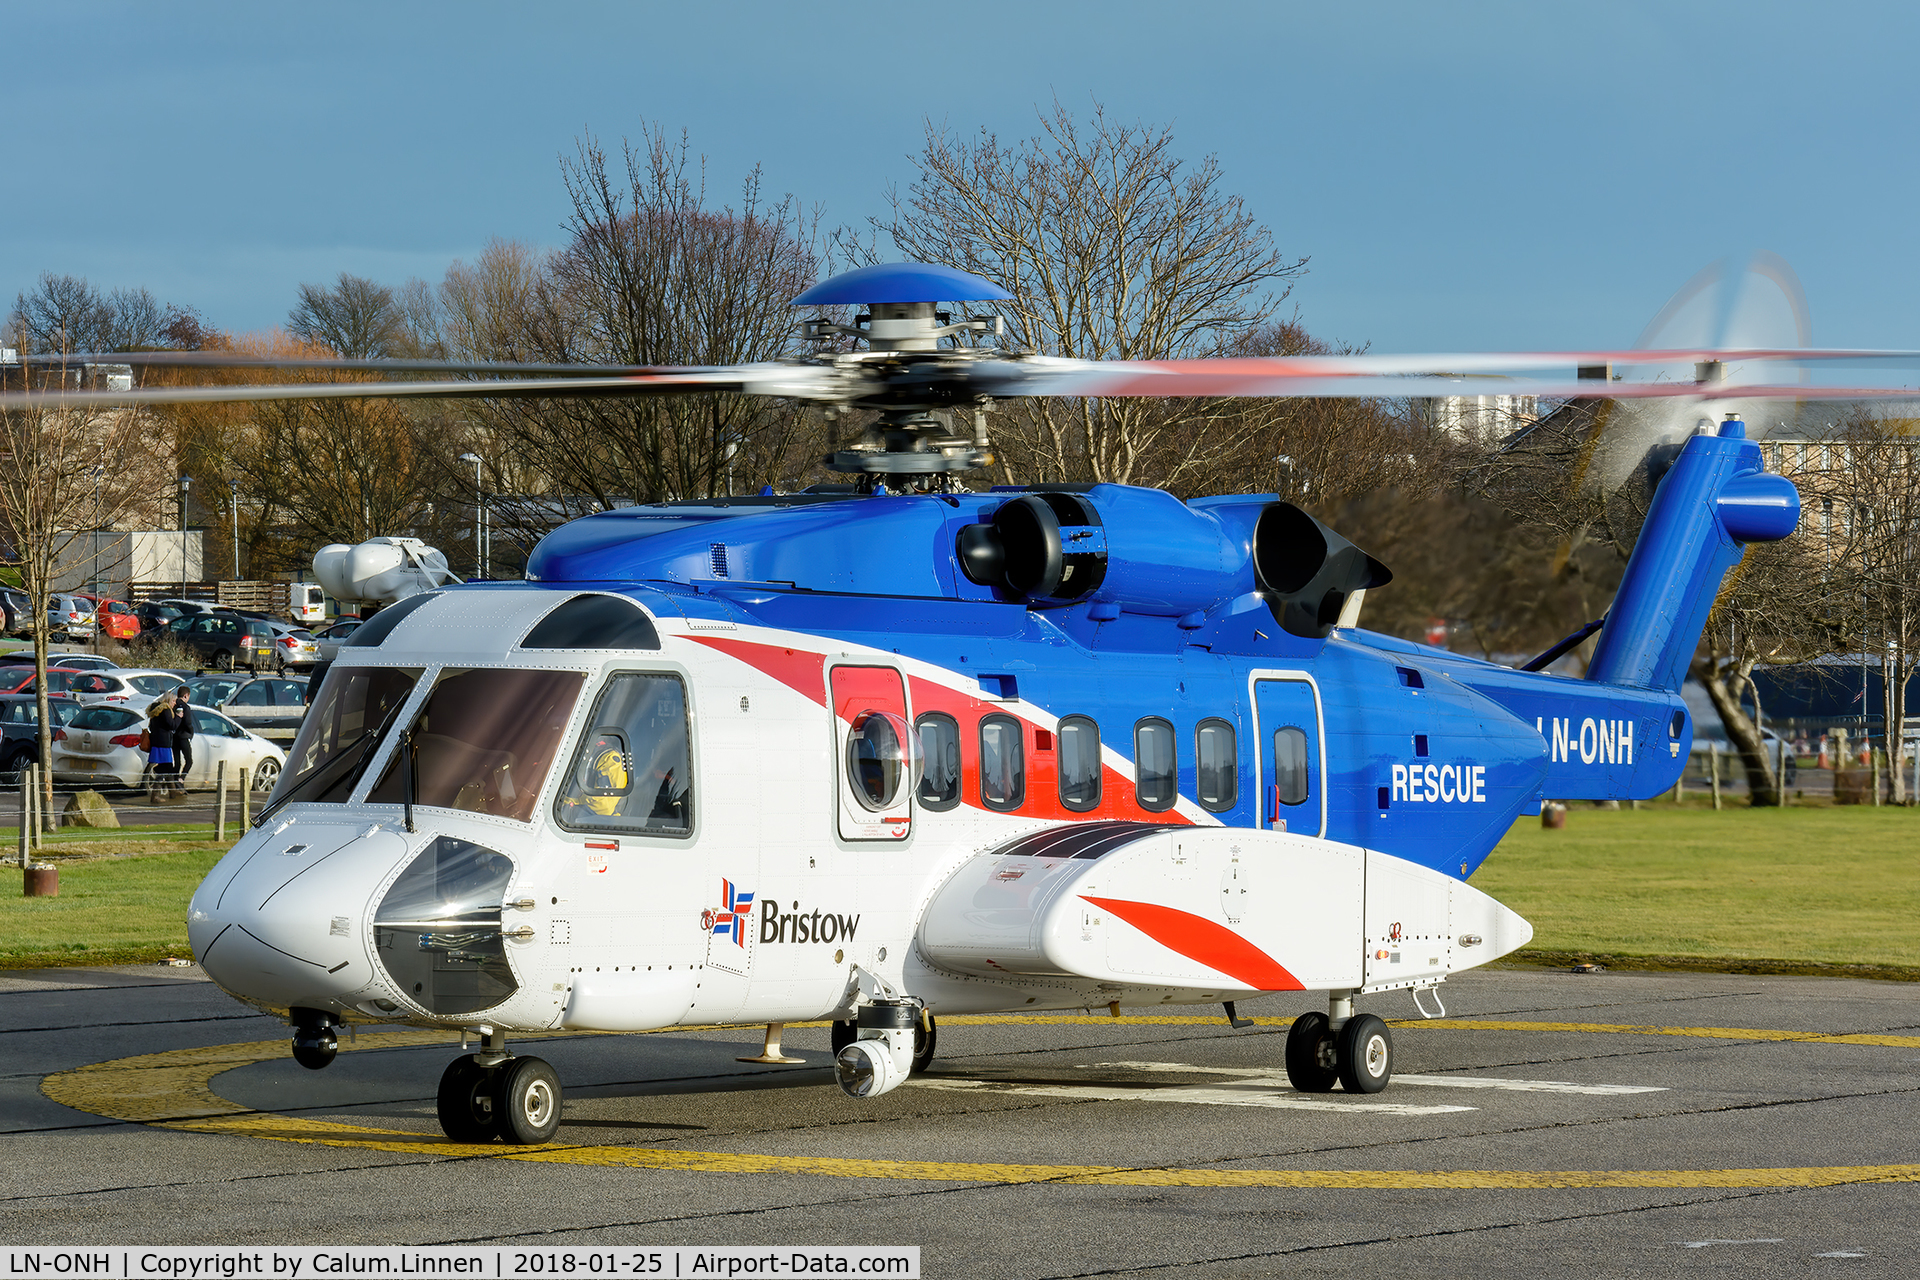 LN-ONH, 2008 Sikorsky S-92A C/N 920094, Bristow Rescue One at Aberdeen Royal Infirmary following a SAR mission in the North Sea.